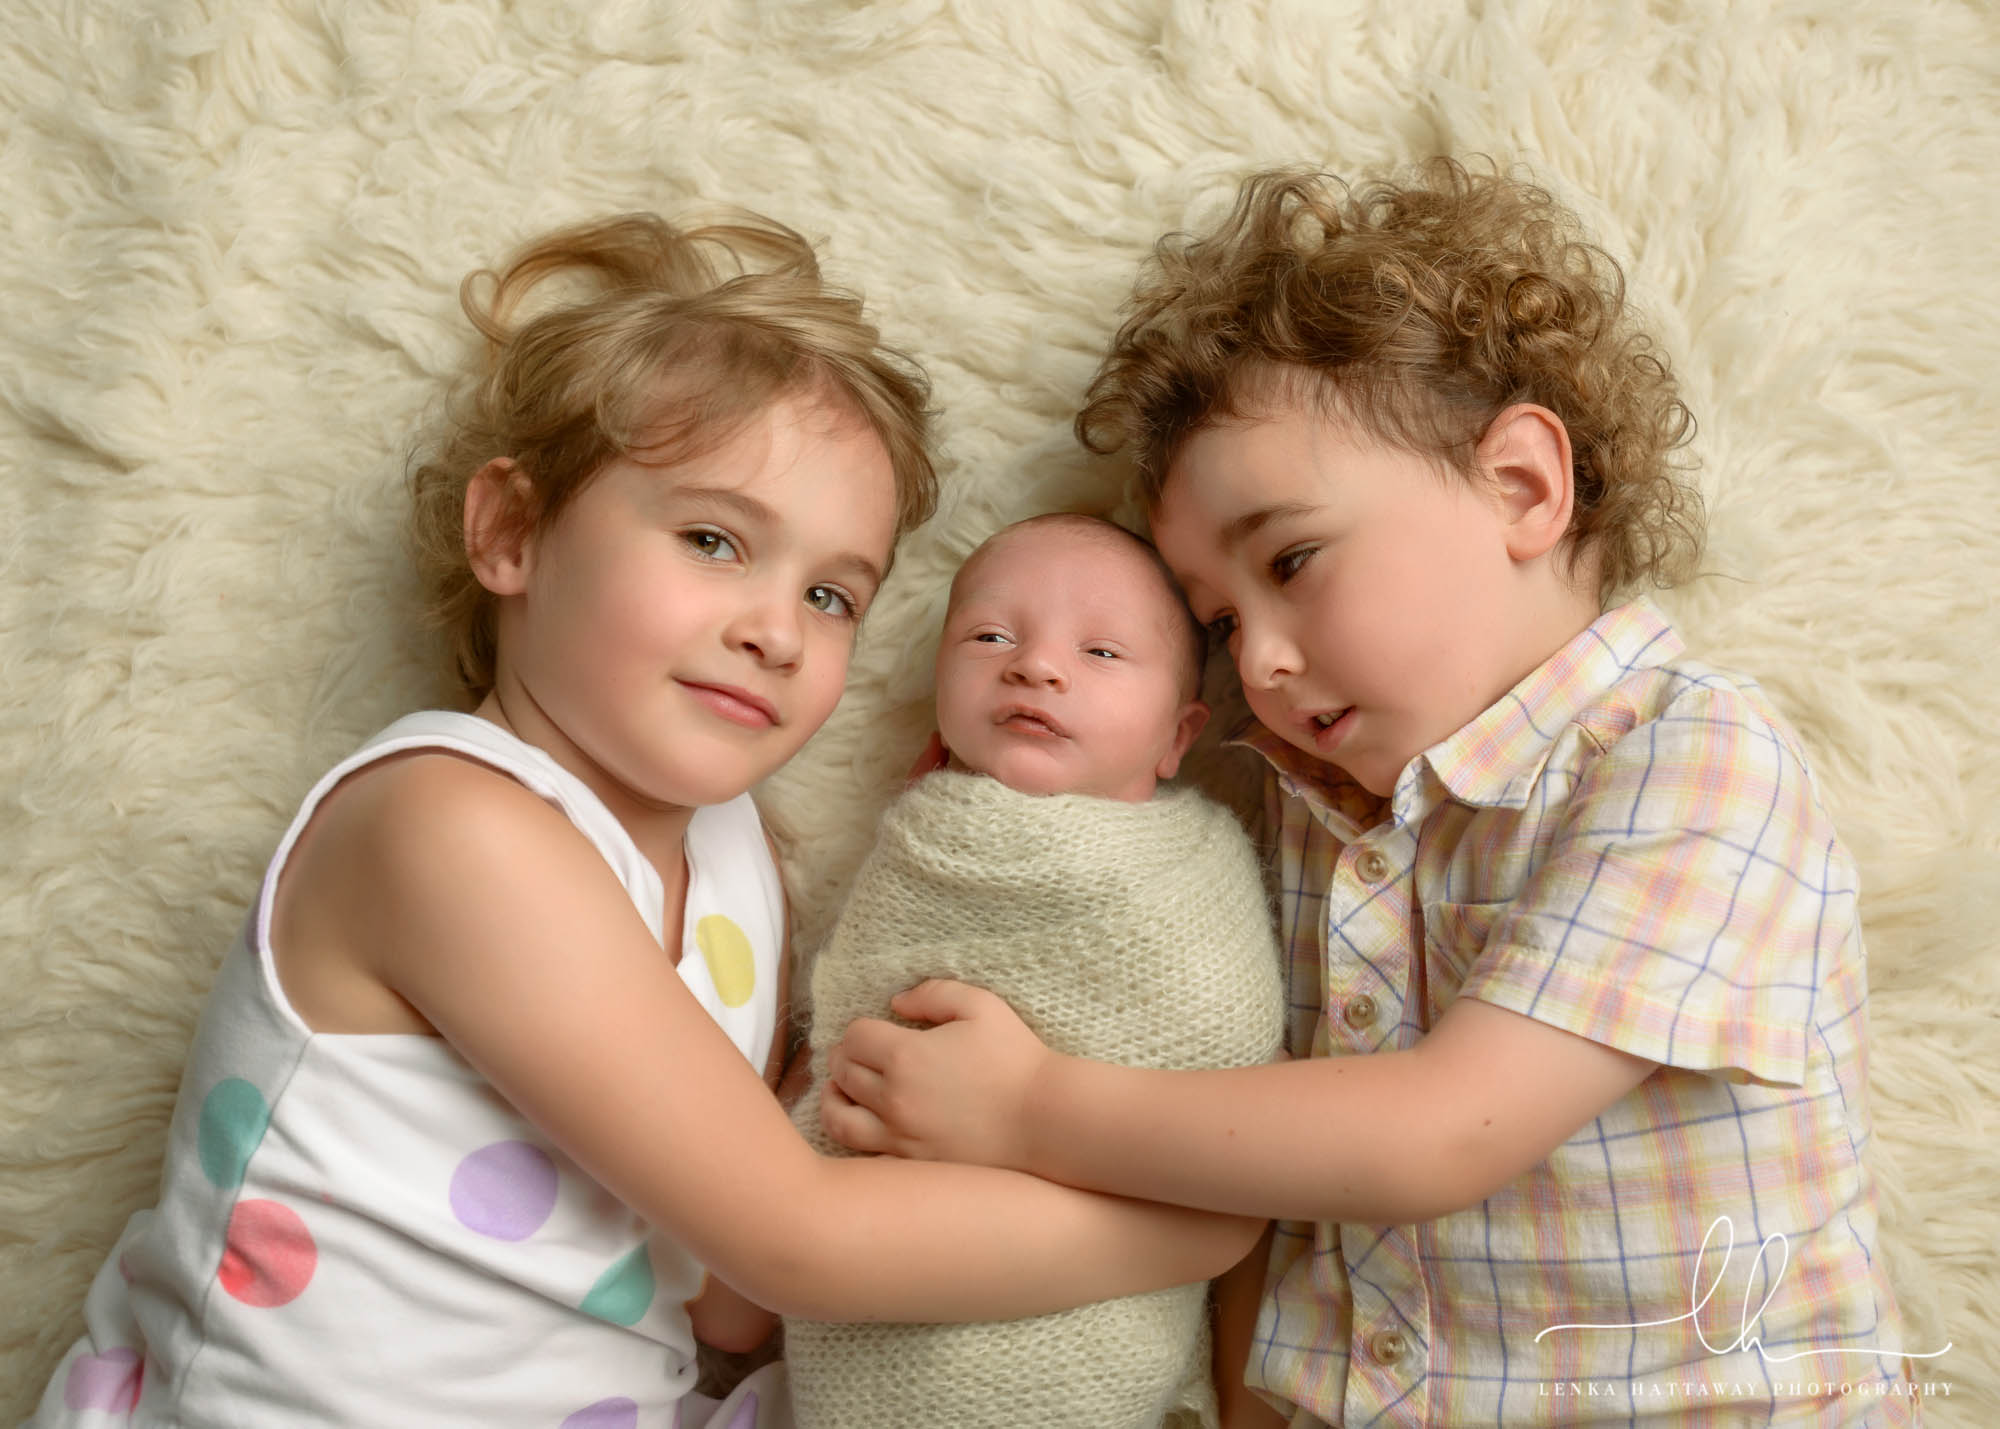 Newborn photo of siblings with their newborn baby brother.